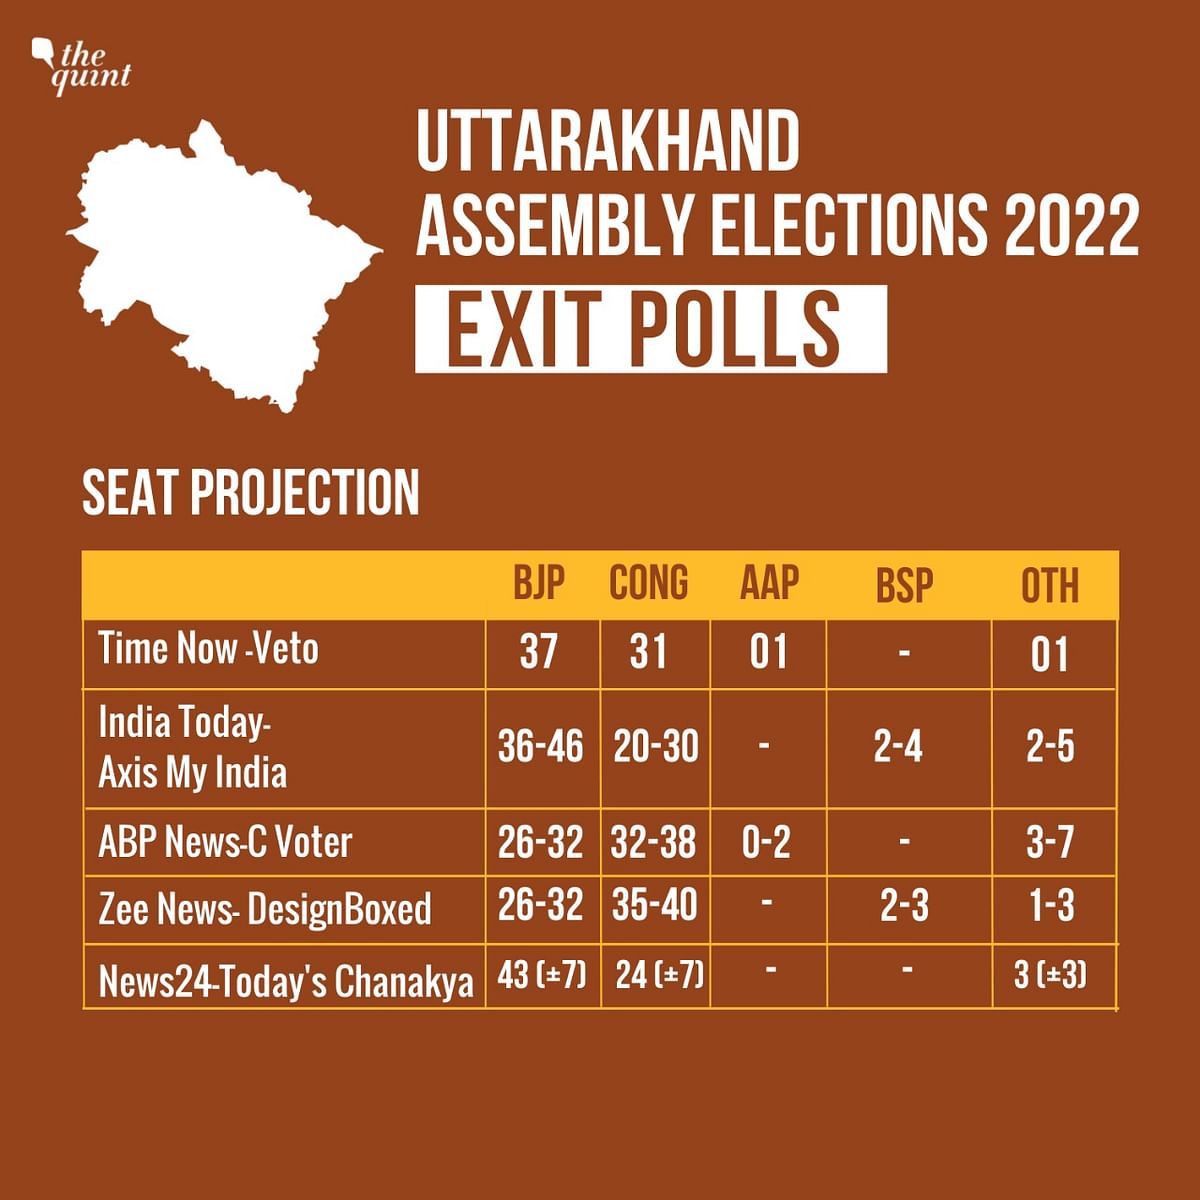 The Quint decodes exit polls for UP, Punjab, Goa, Manipur, and Uttarakhand. The votes will be counted on 10 March.